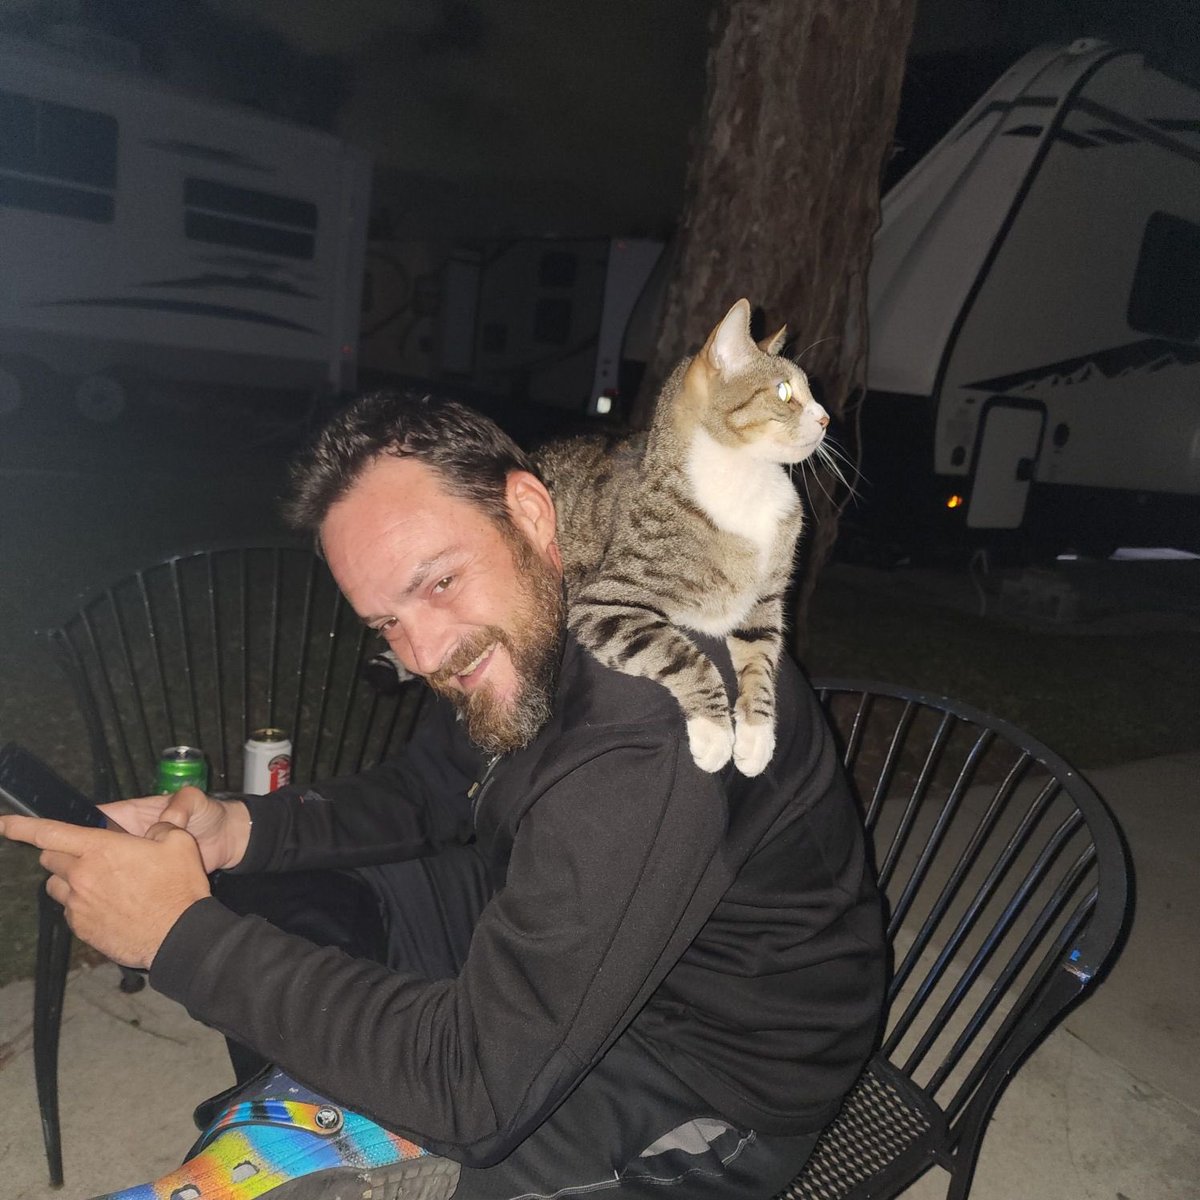 This is the official launch of the #MoonCat society co-founded by my #ApolloXI cat and by authentic MoonCat rescued by @READY_PLAYER_X - see their picture! and @READY_PLAYER_X is also the creator of my MoonCat token!  

Your cats are invited to join - the first real cats